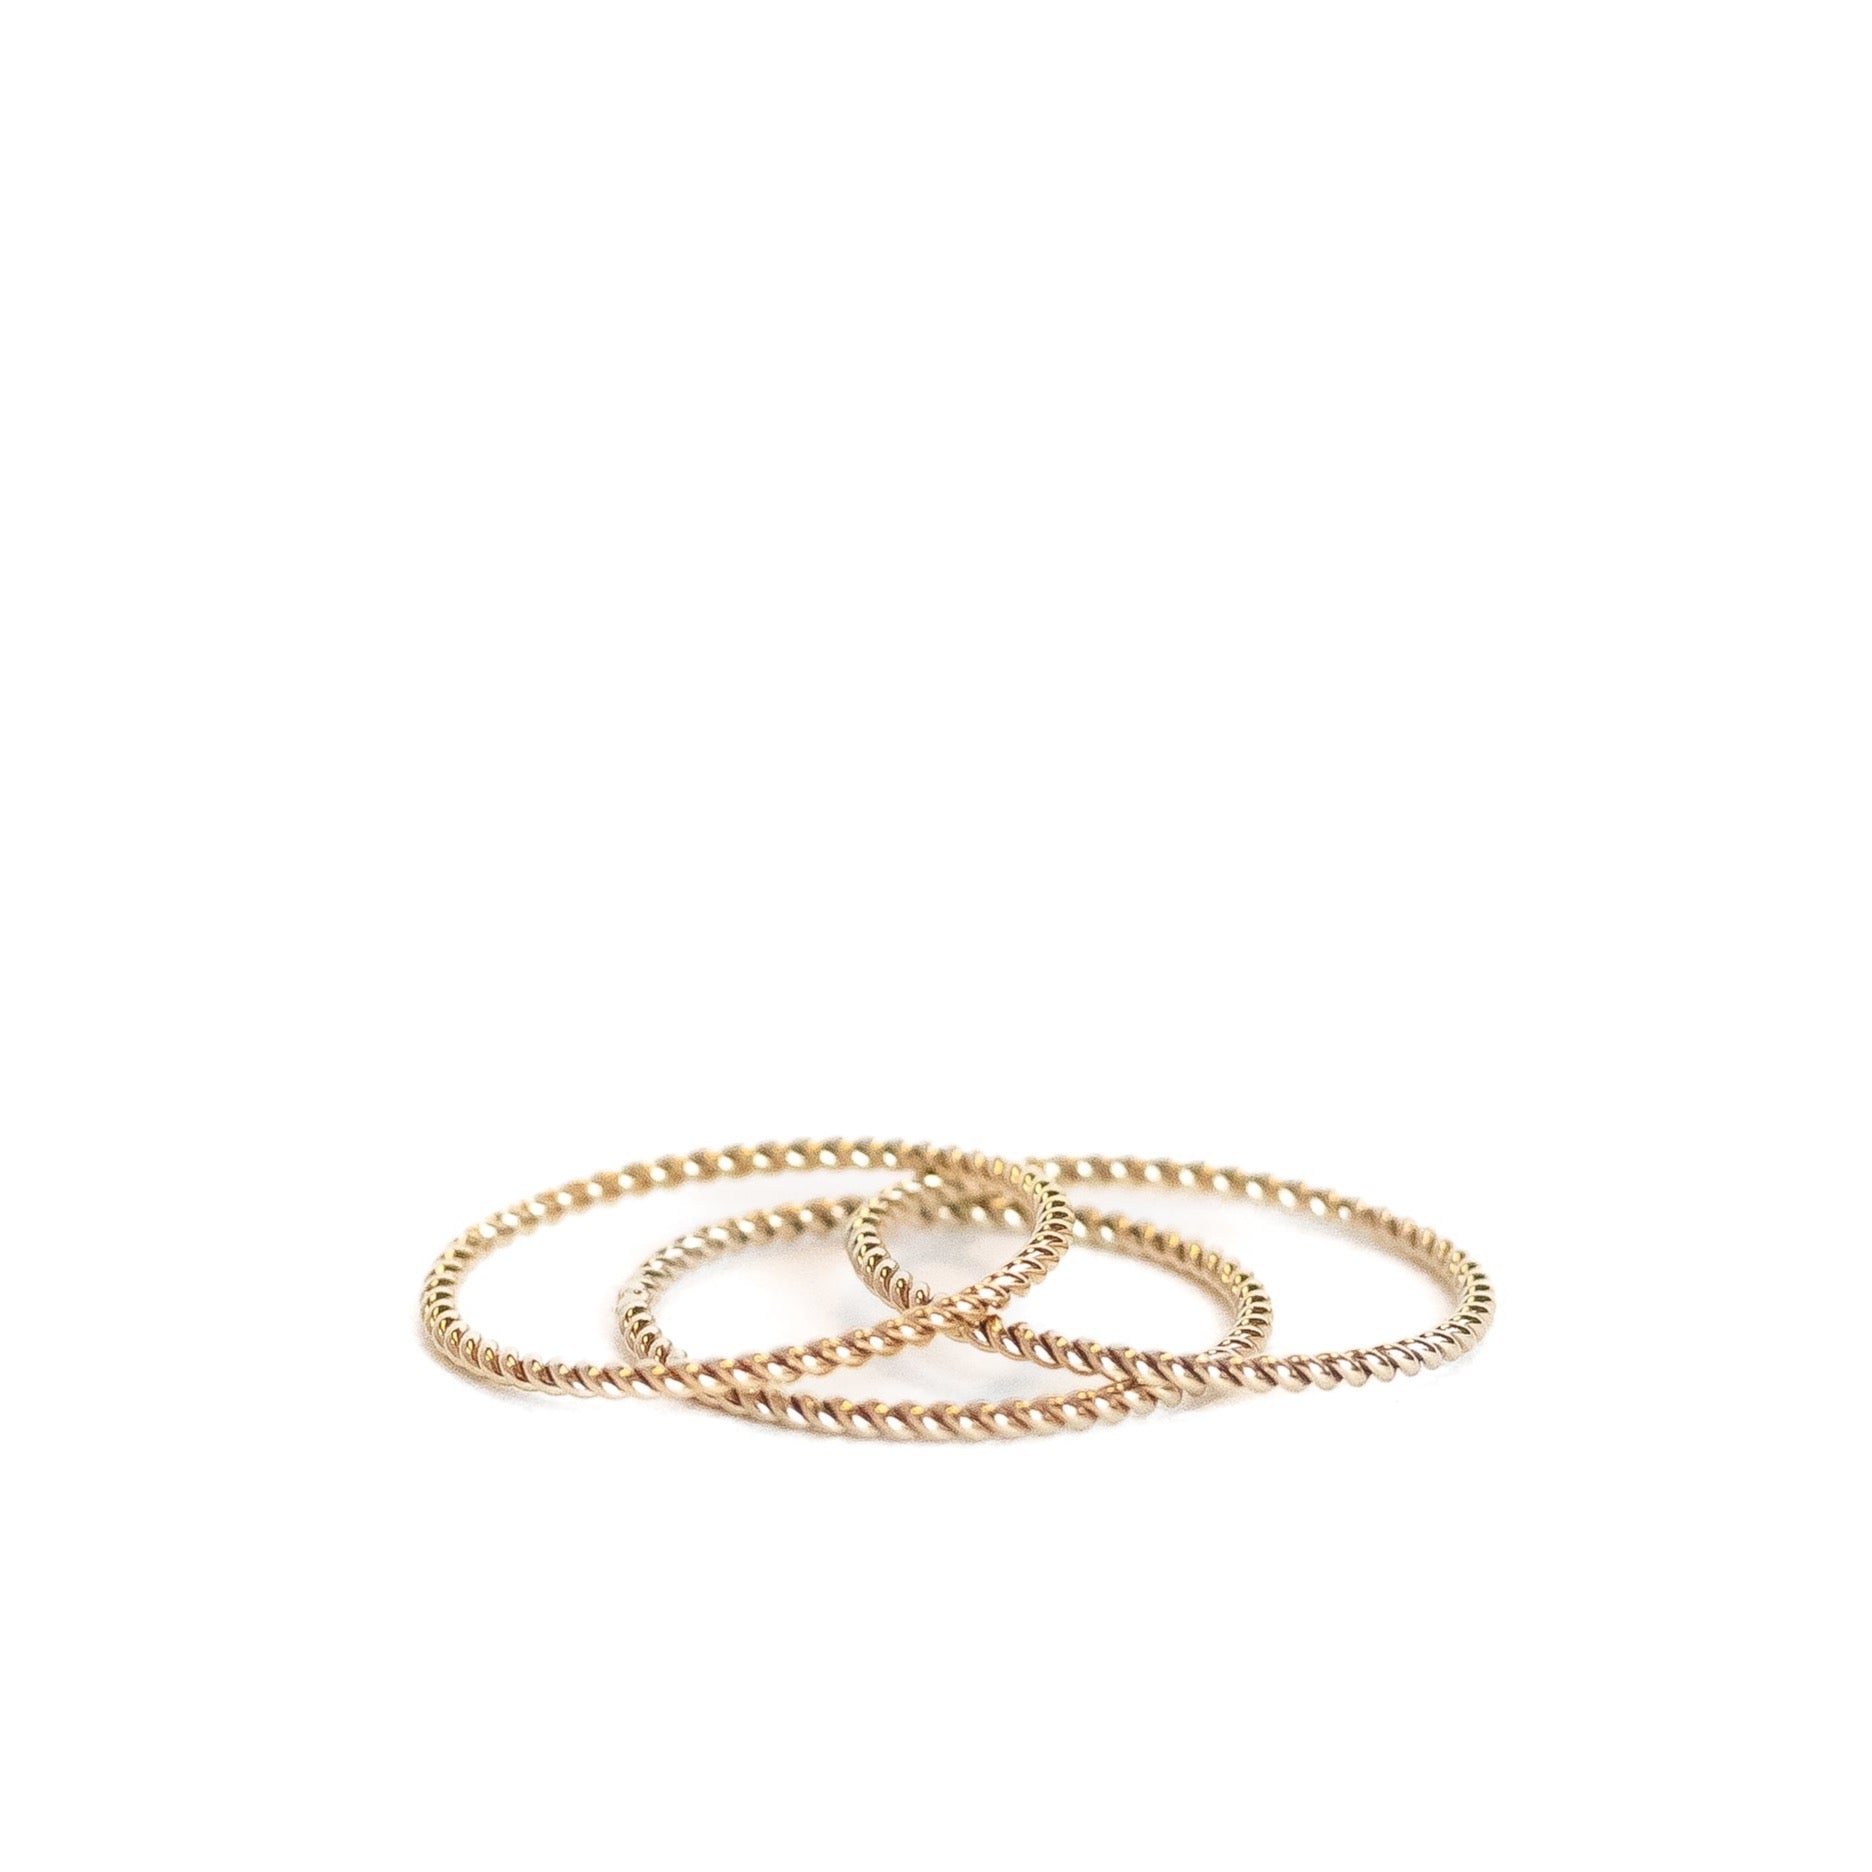 Yellow gold filled twist wire ring. Three shown. 